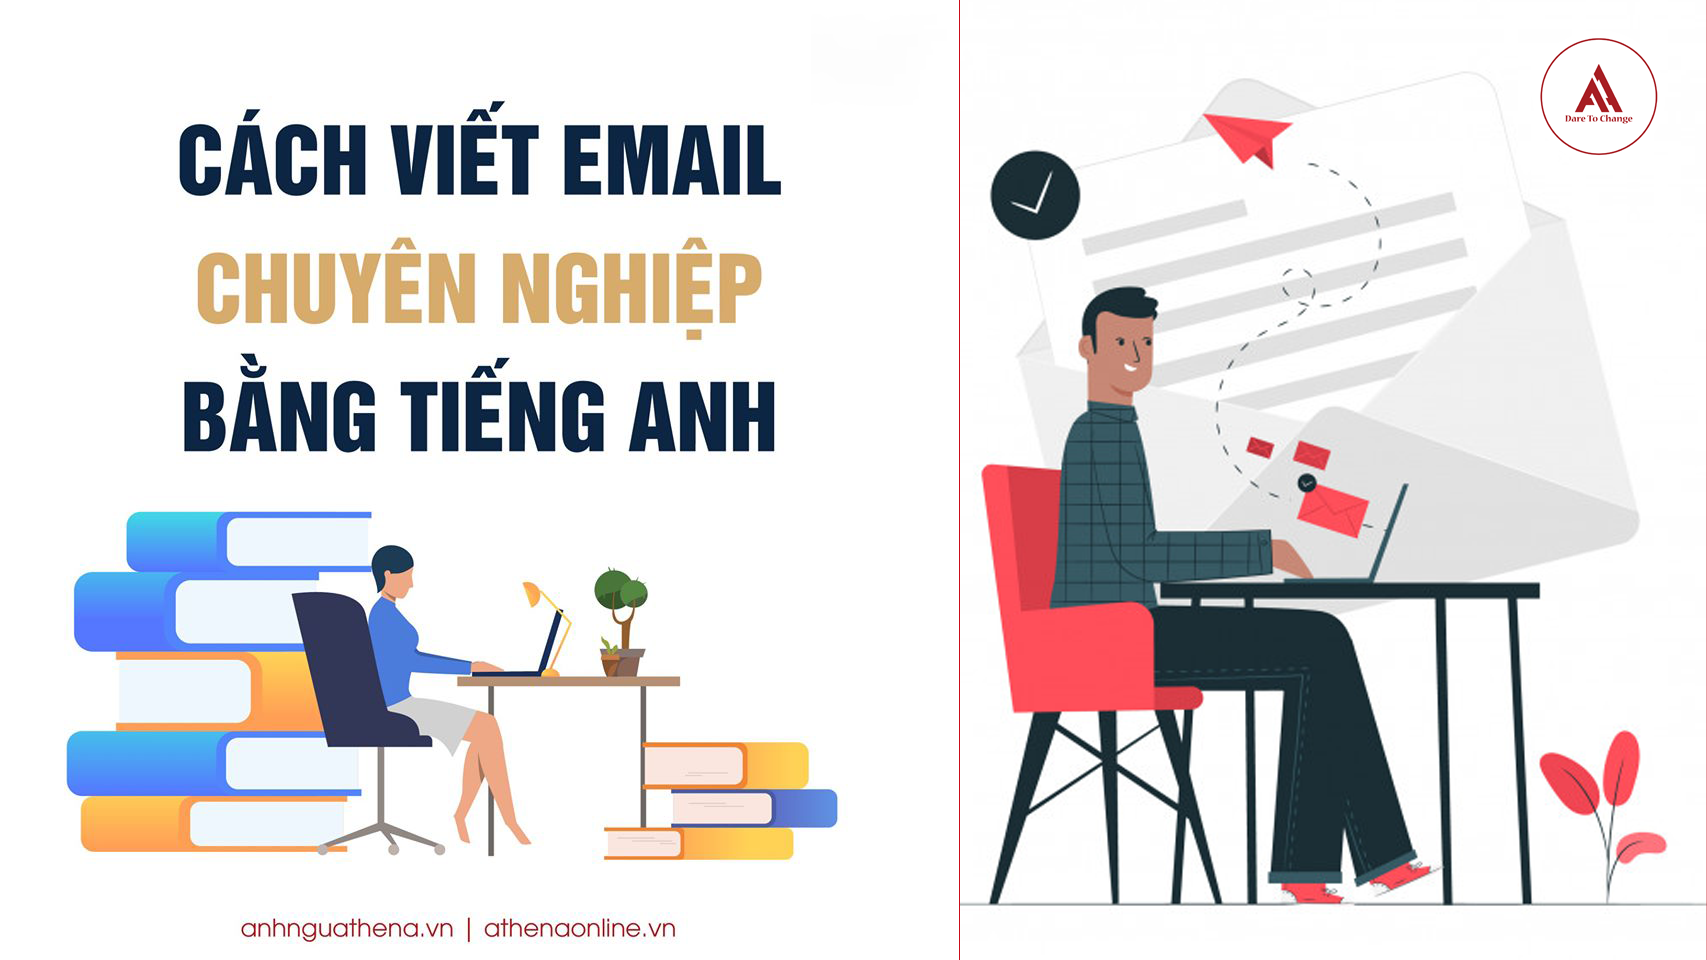 cach-viet-email-chuyen-nghiep-bang-tieng-anh